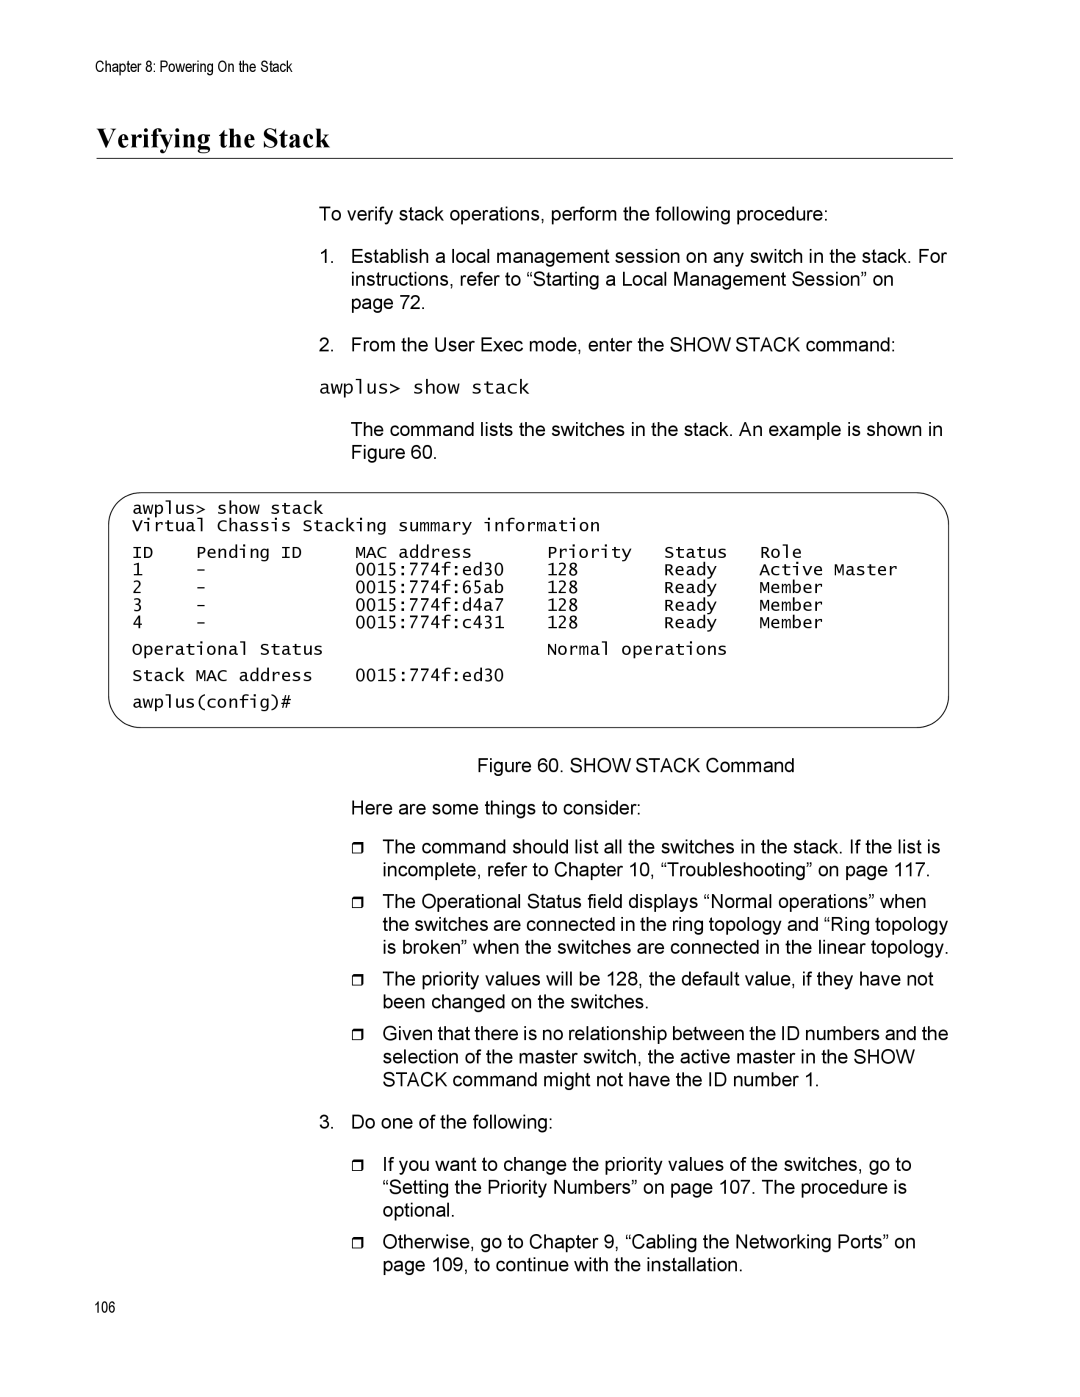 Allied Telesis AT-IX5-28GPX manual Verifying the Stack 